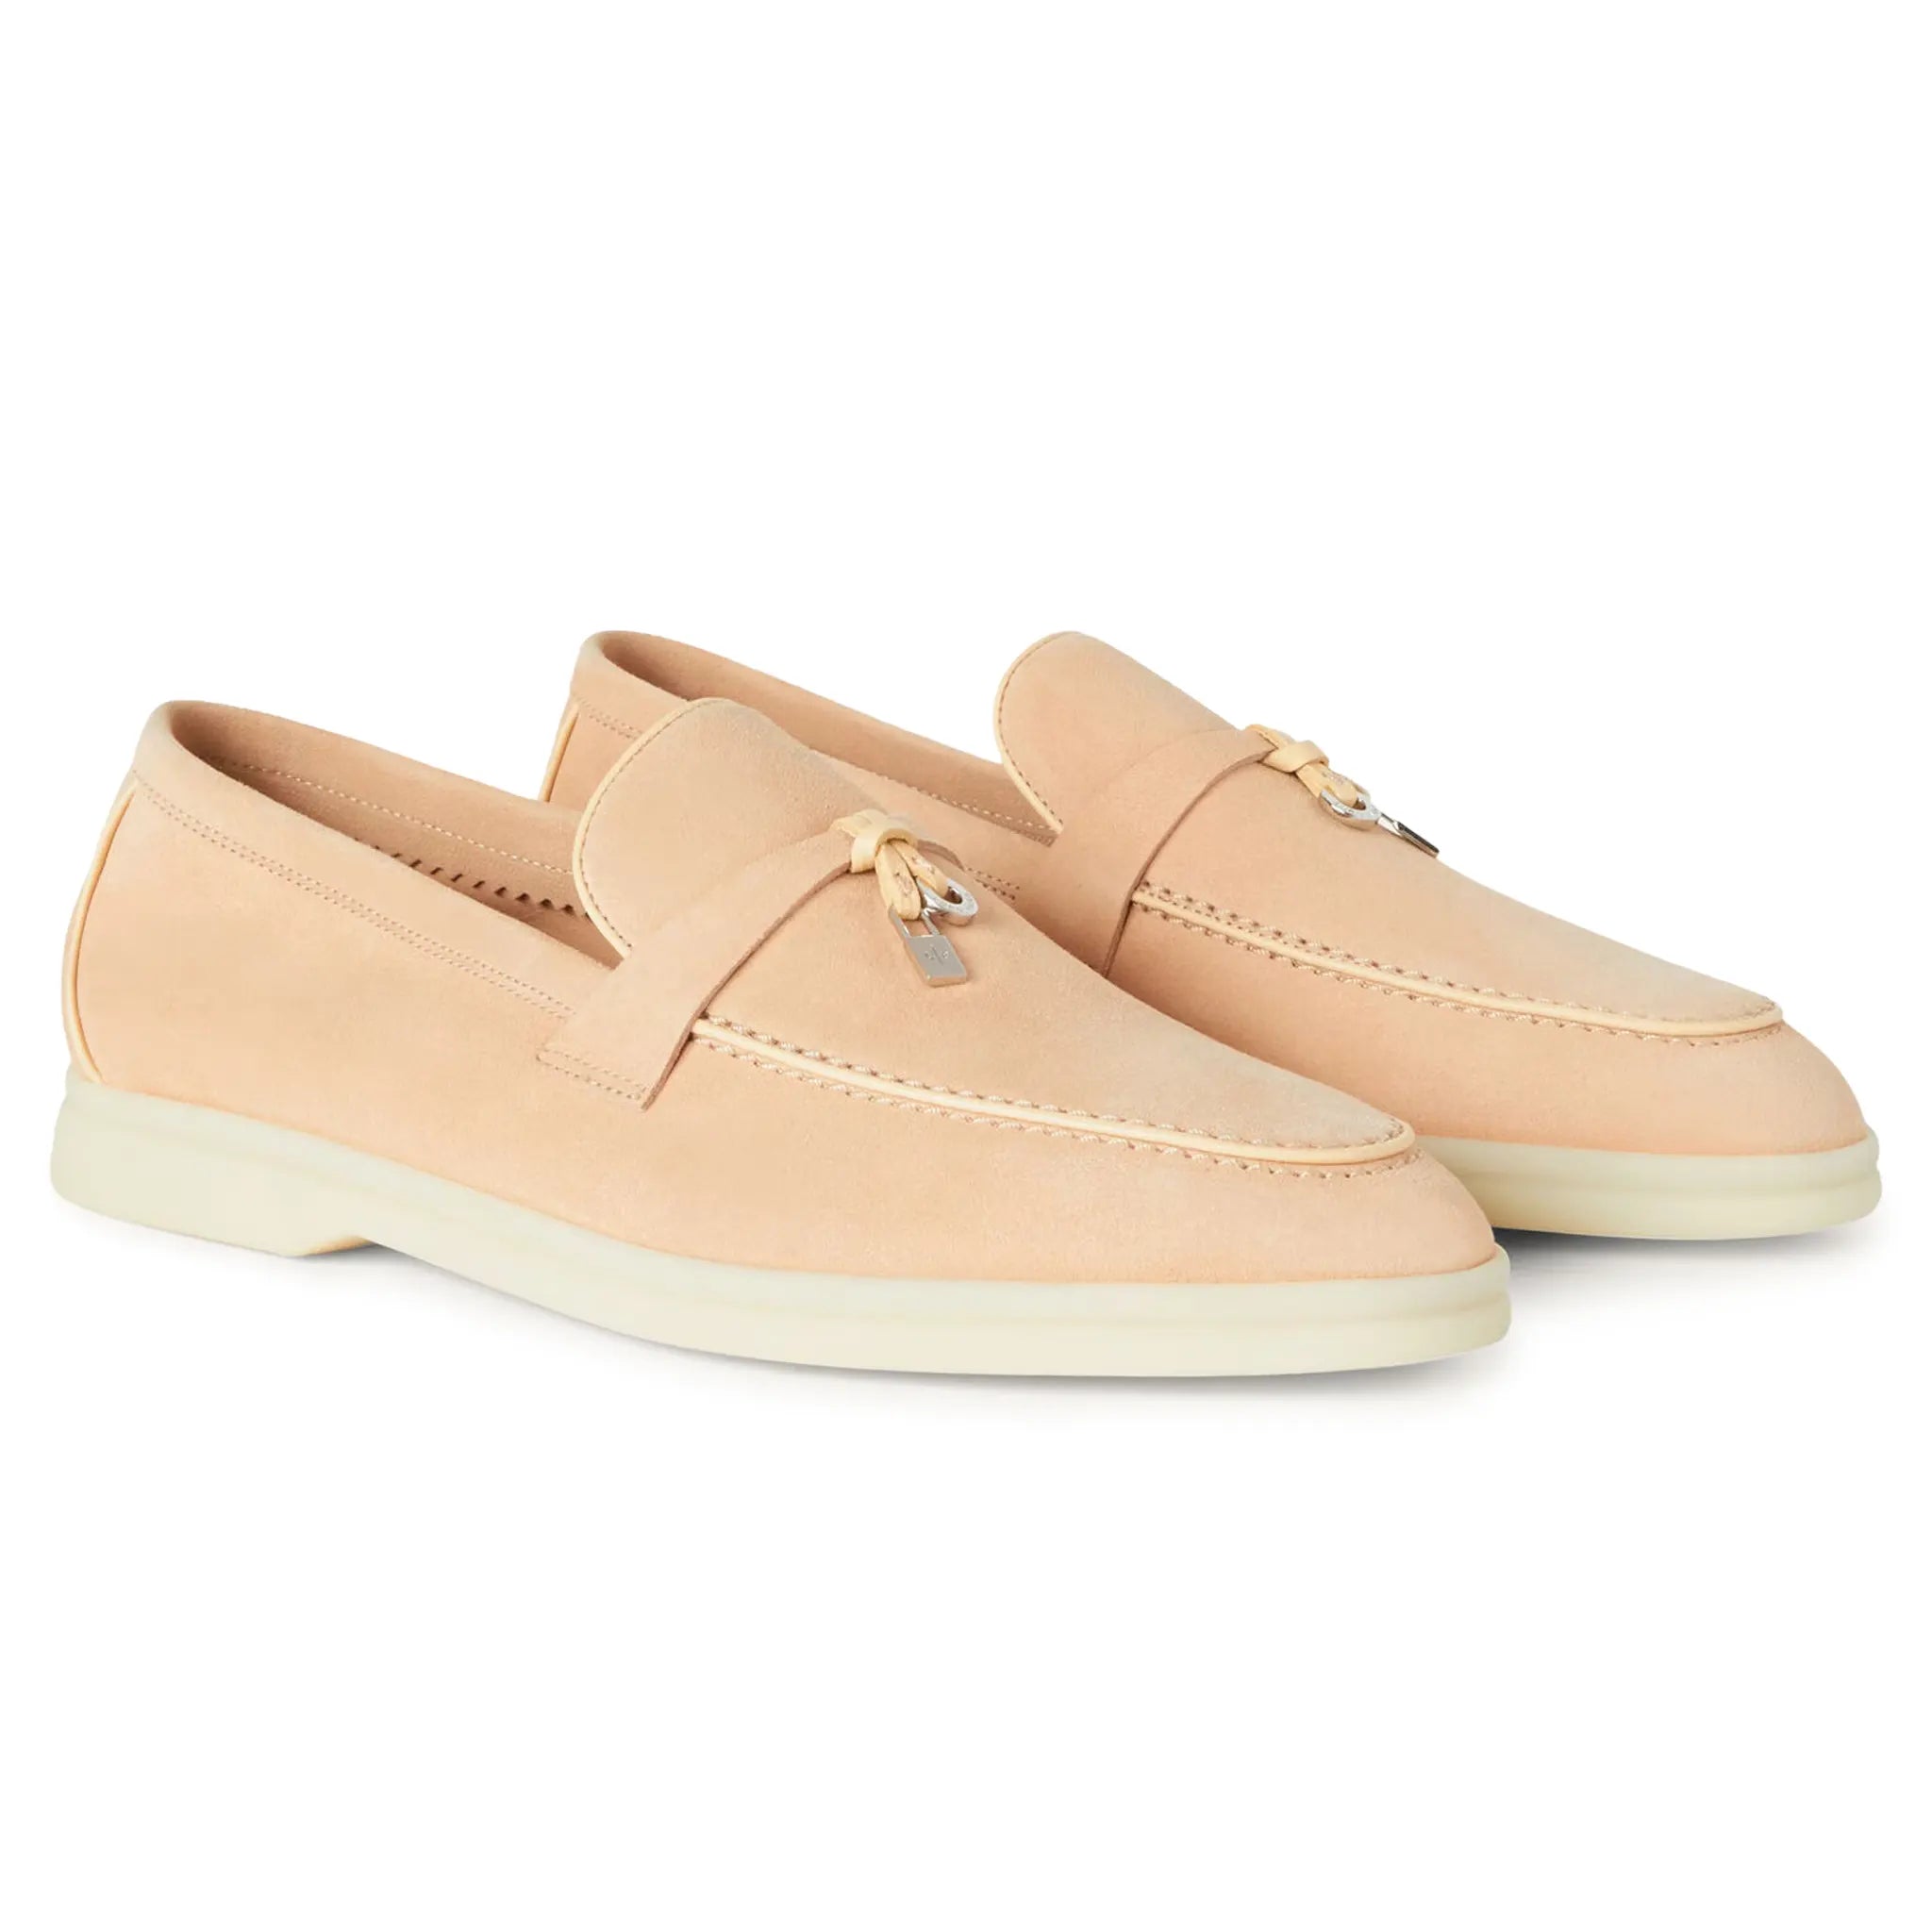 Pair view of Loro Piana Summer Charms Walk Suede Goatskin Pink Reef Loafers FAL5899